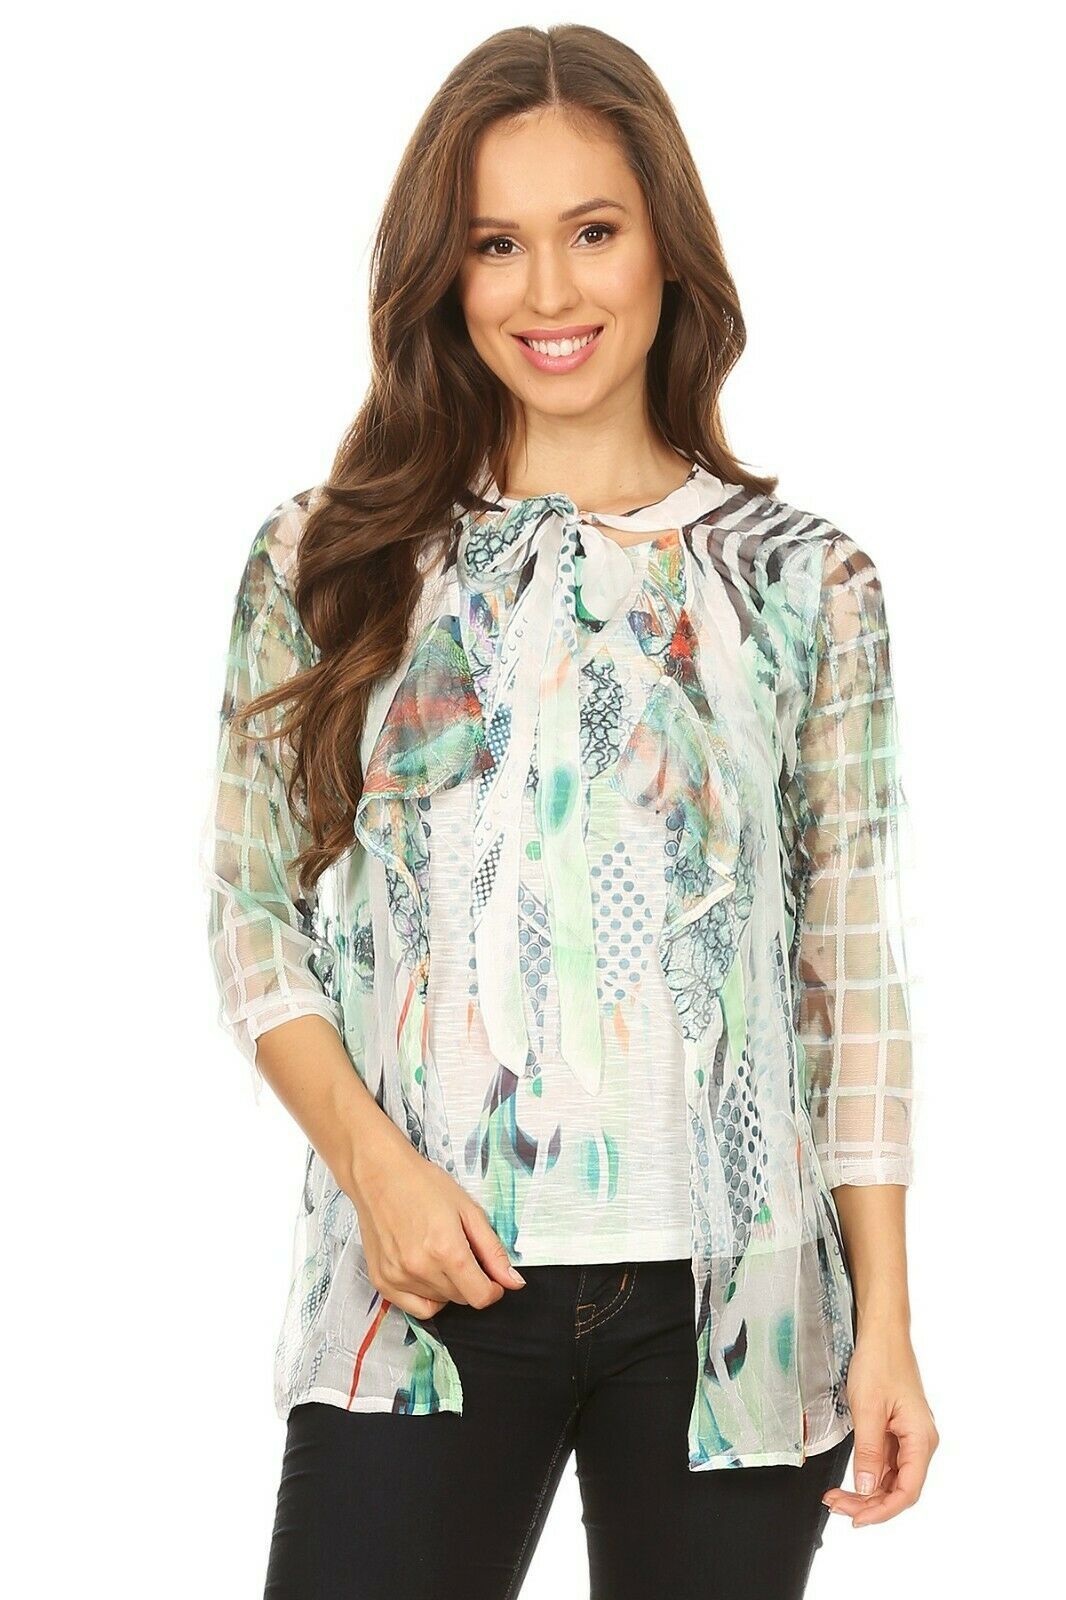 Primary image for Women's Multi Color Cardigan and Sleeveless Top